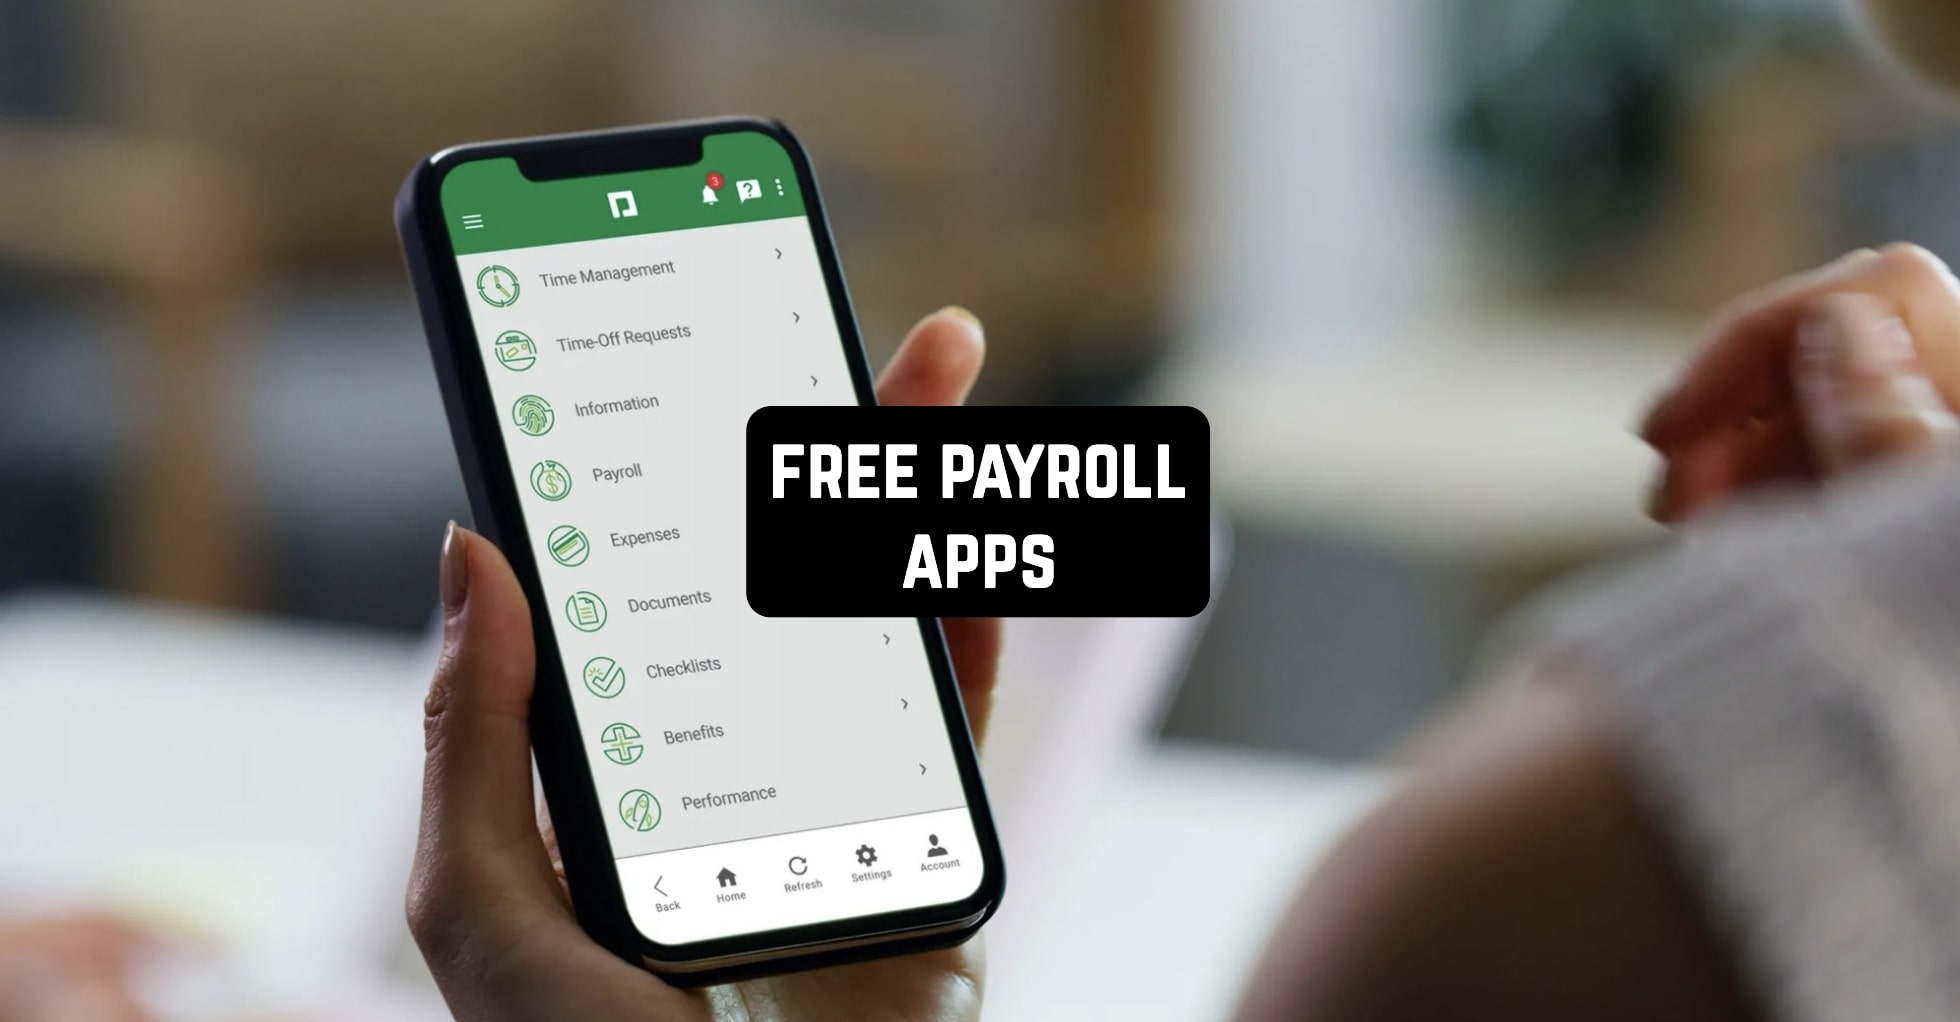 Free-Payroll-Apps-1